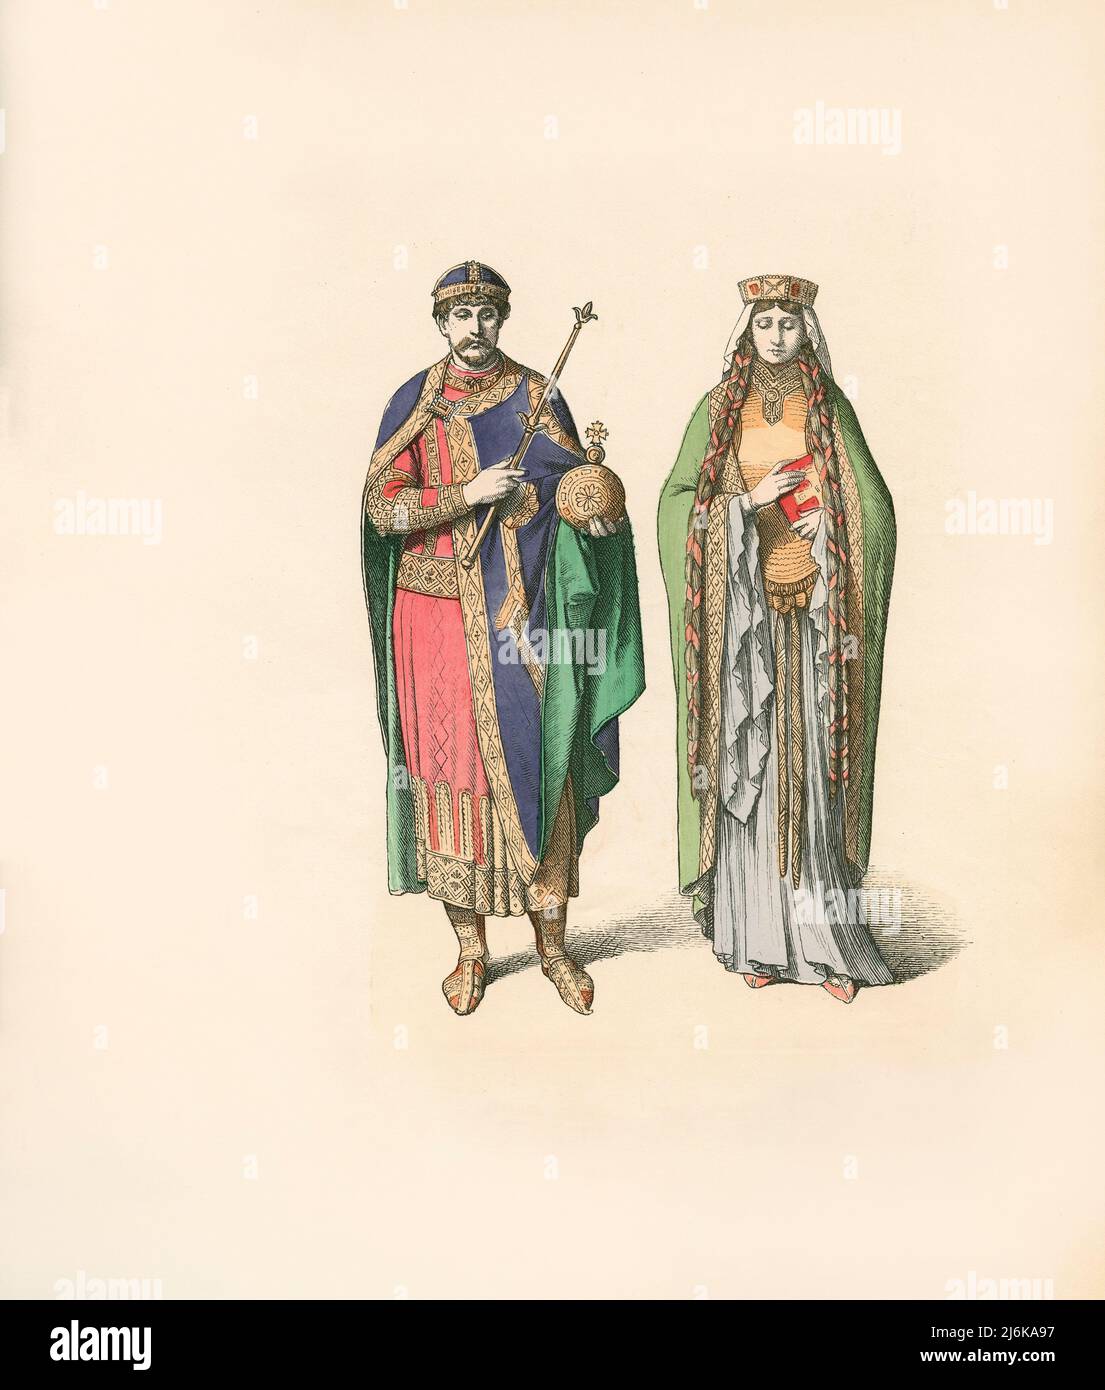 Frankish King and Queen, 11th Century, Illustration, The History of Costume, Braun & Schneider, Munich, Allemagne, 1861-1880 Banque D'Images